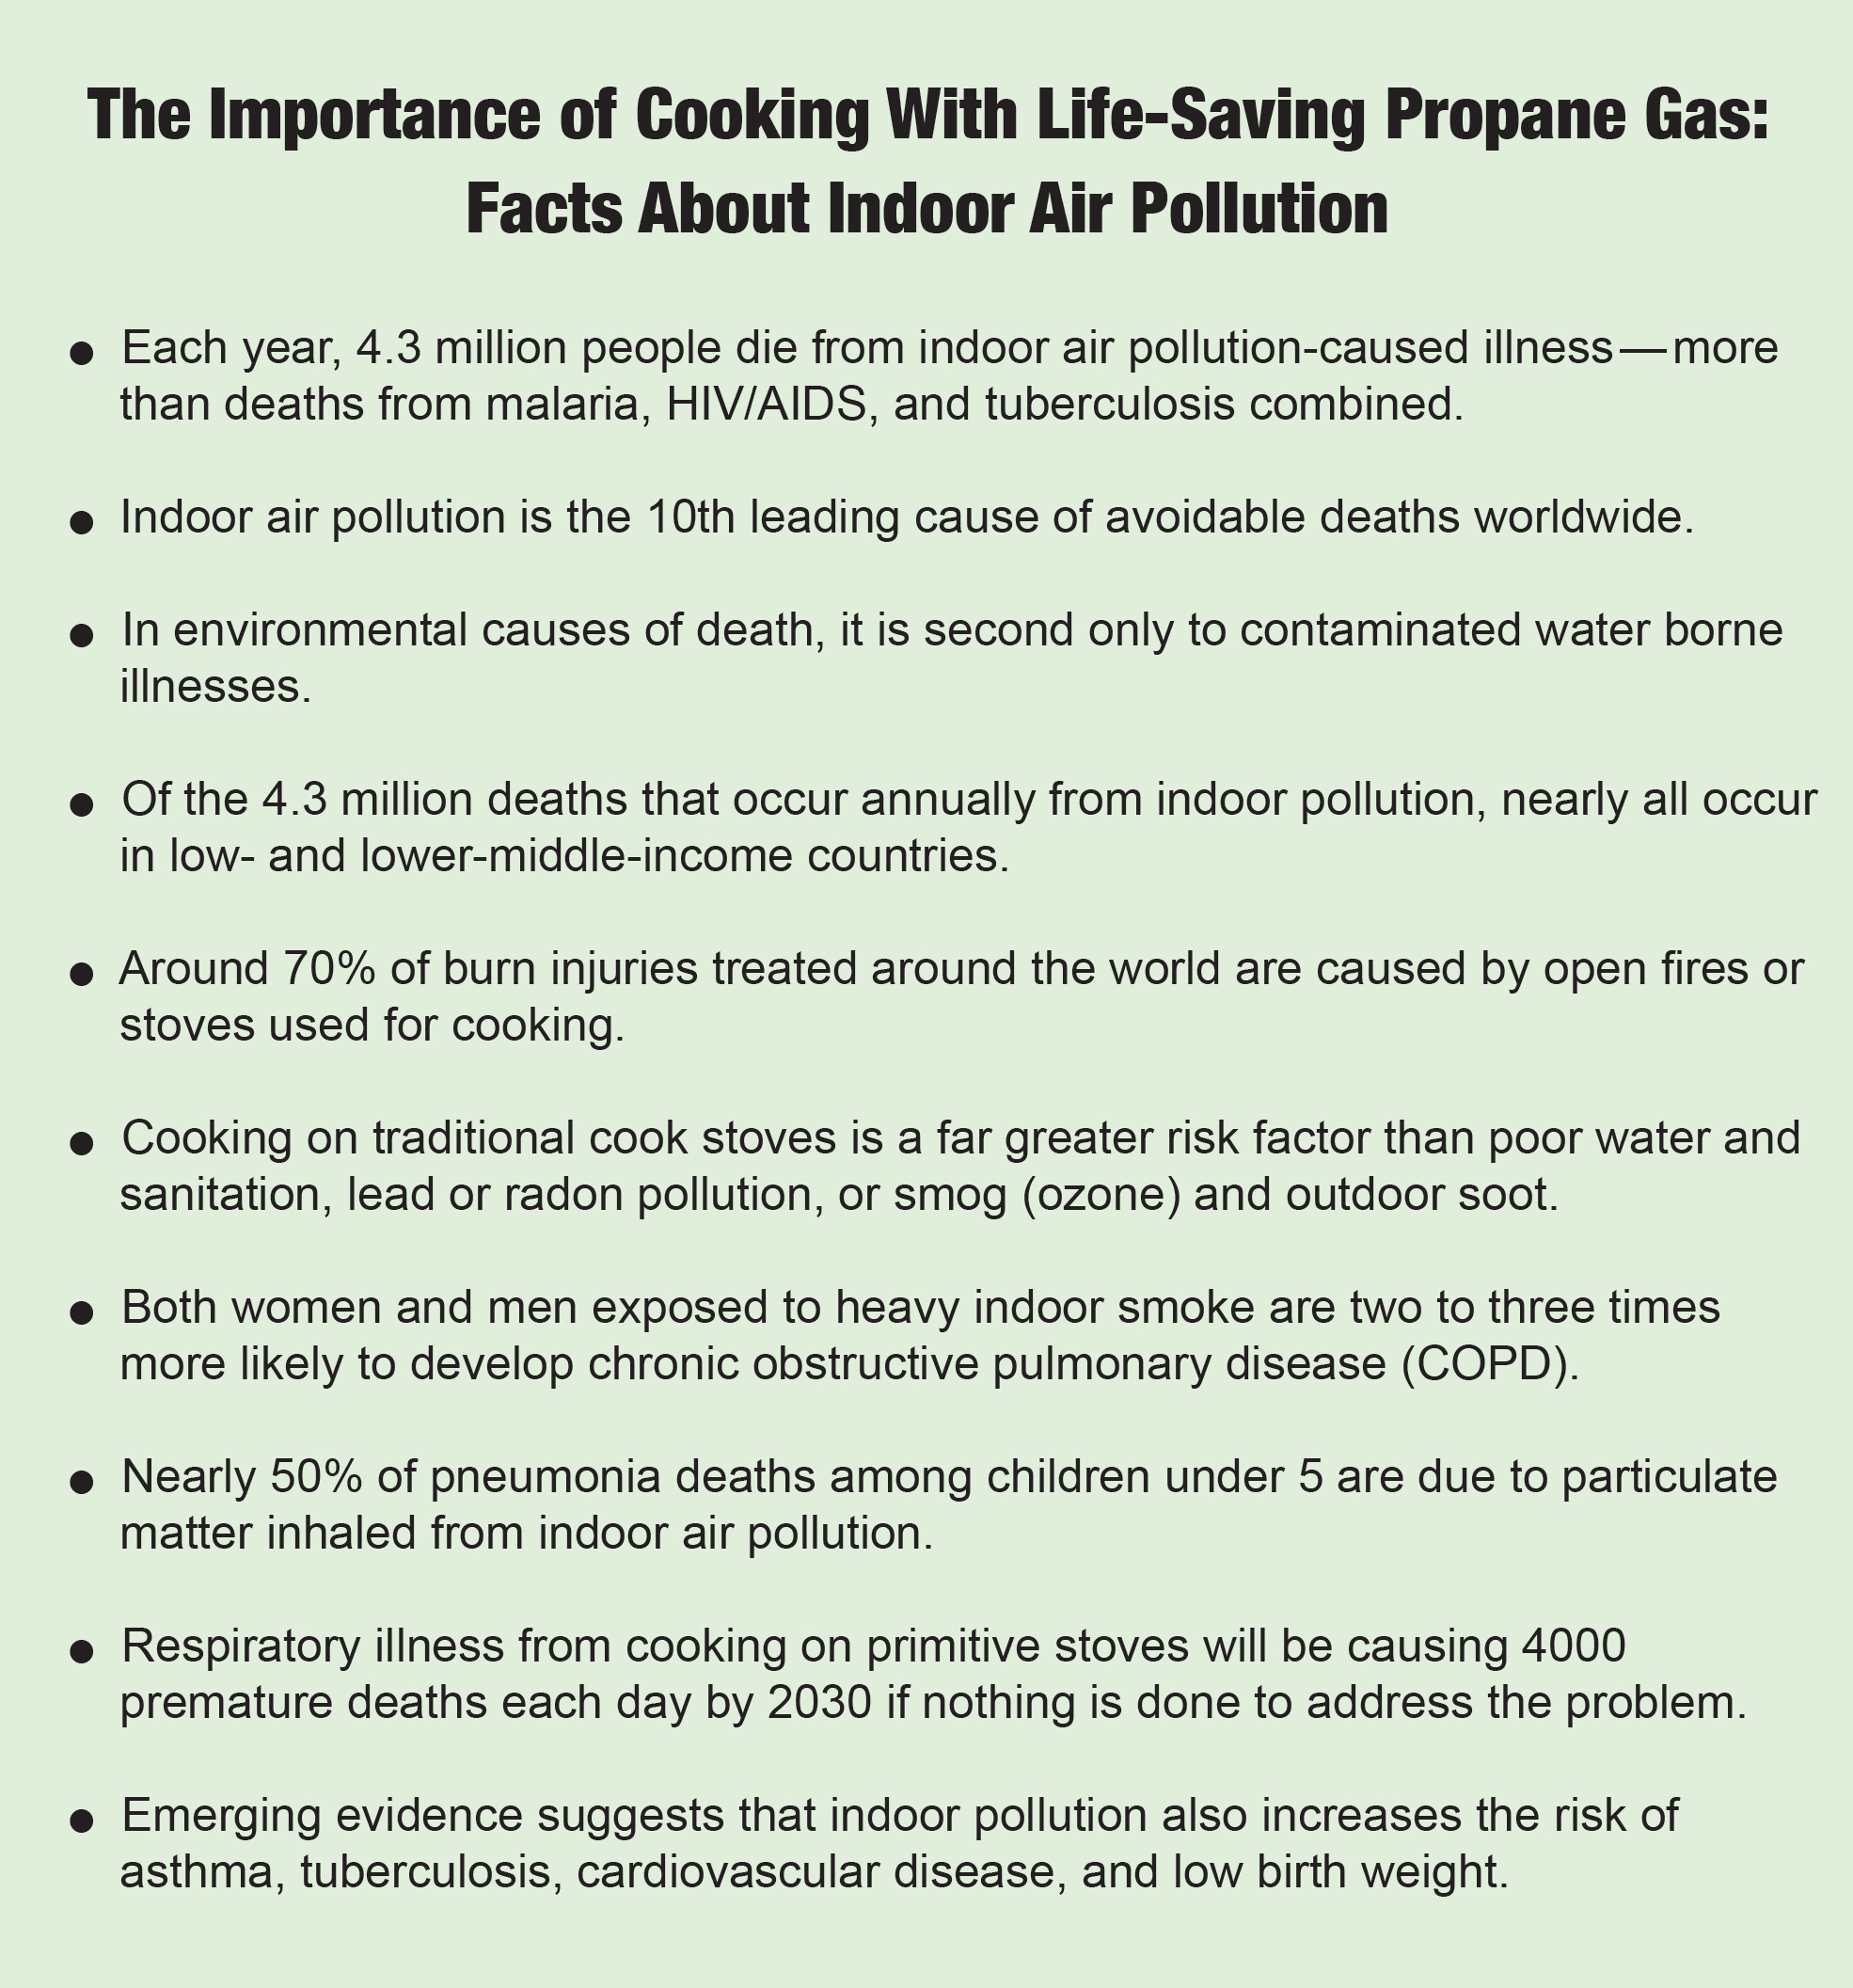 Cooking For Life Community Kitchen Initiative Reduces Deaths From Indoor Pollution By Using Propane Not Coal or Dung reports BPN the propane industry's leading source for news and information since 1939.